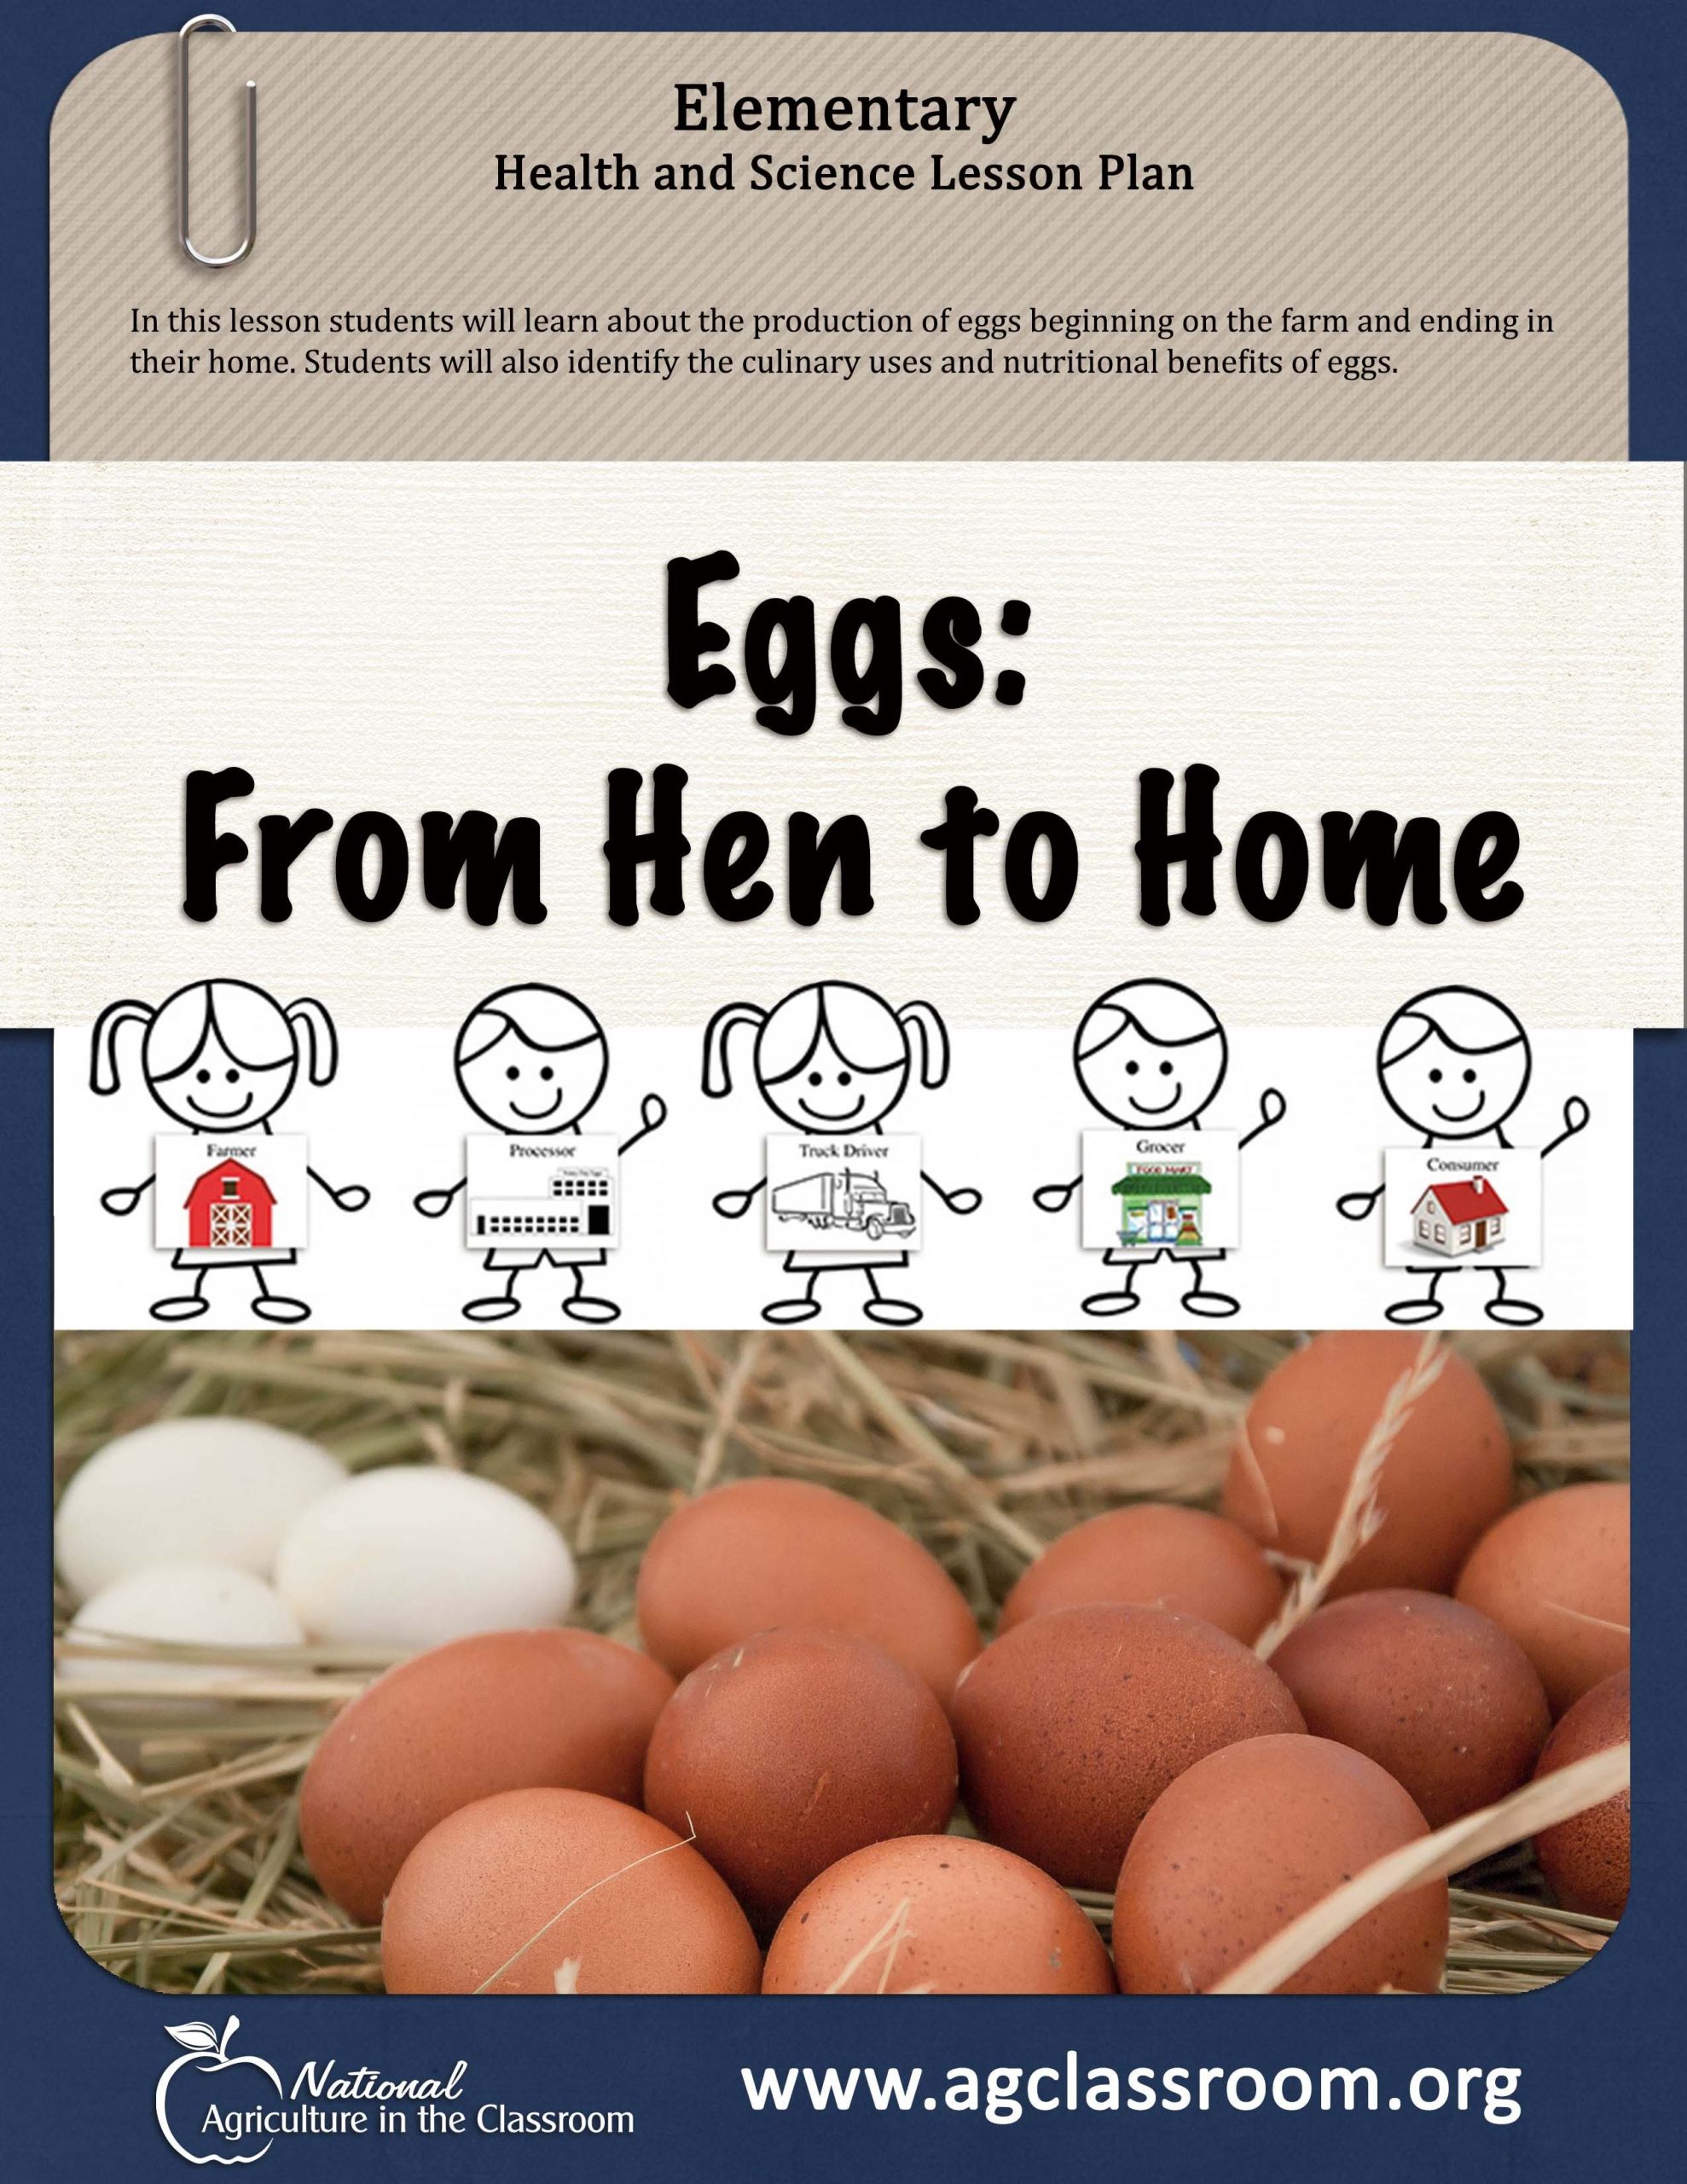 Elementary Lesson Plan Teaching About The Production Of Eggs